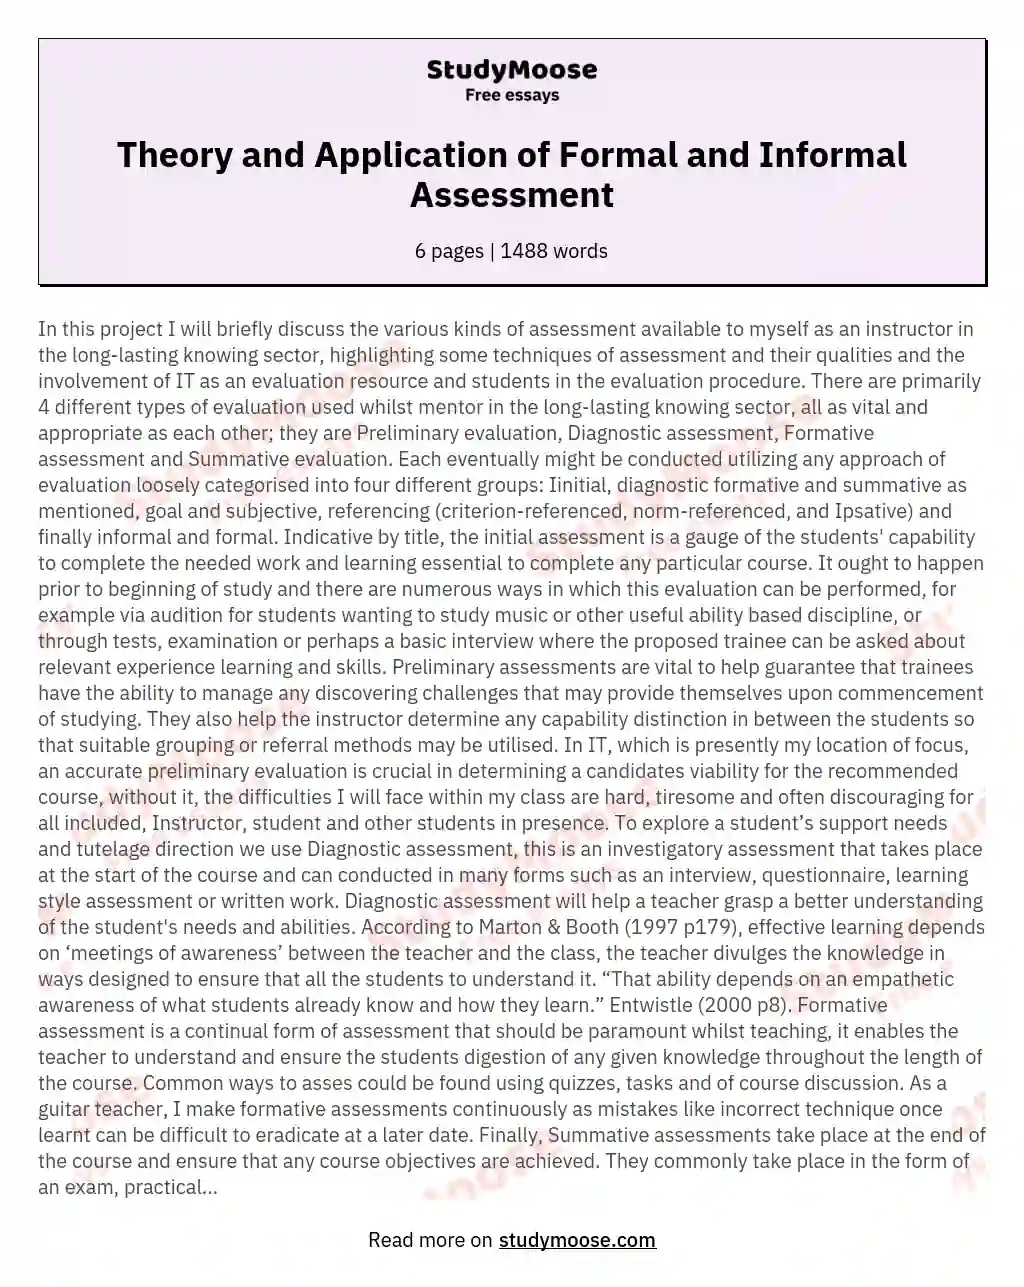 Theory and Application of Formal and Informal Assessment essay